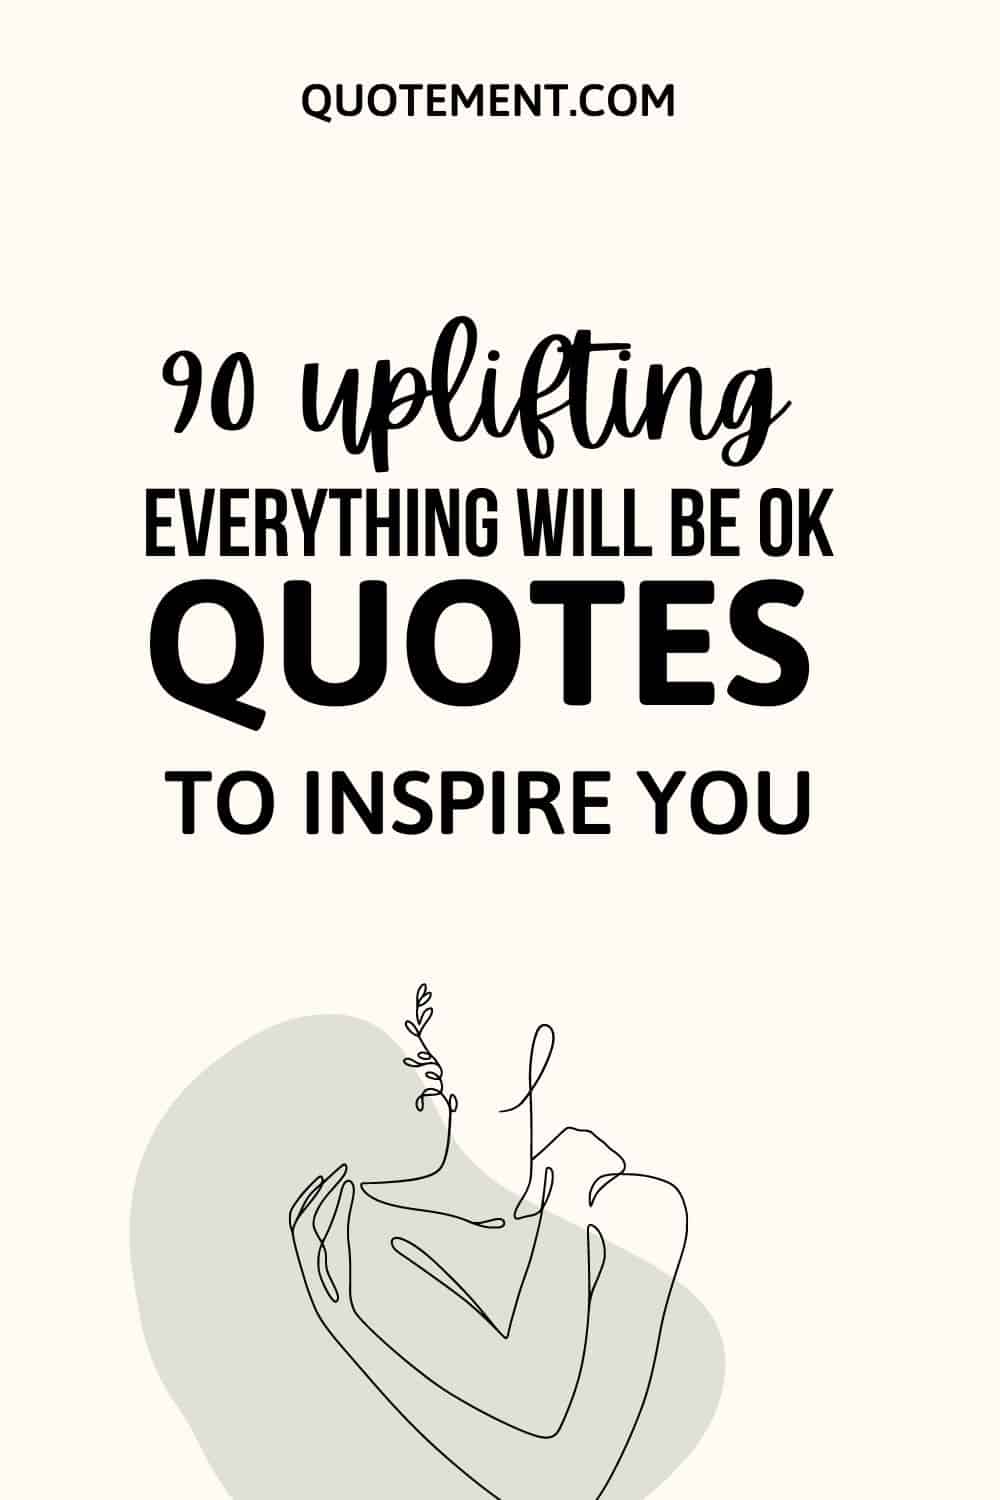 90 Uplifting Everything Will Be Ok Quotes To Inspire You
